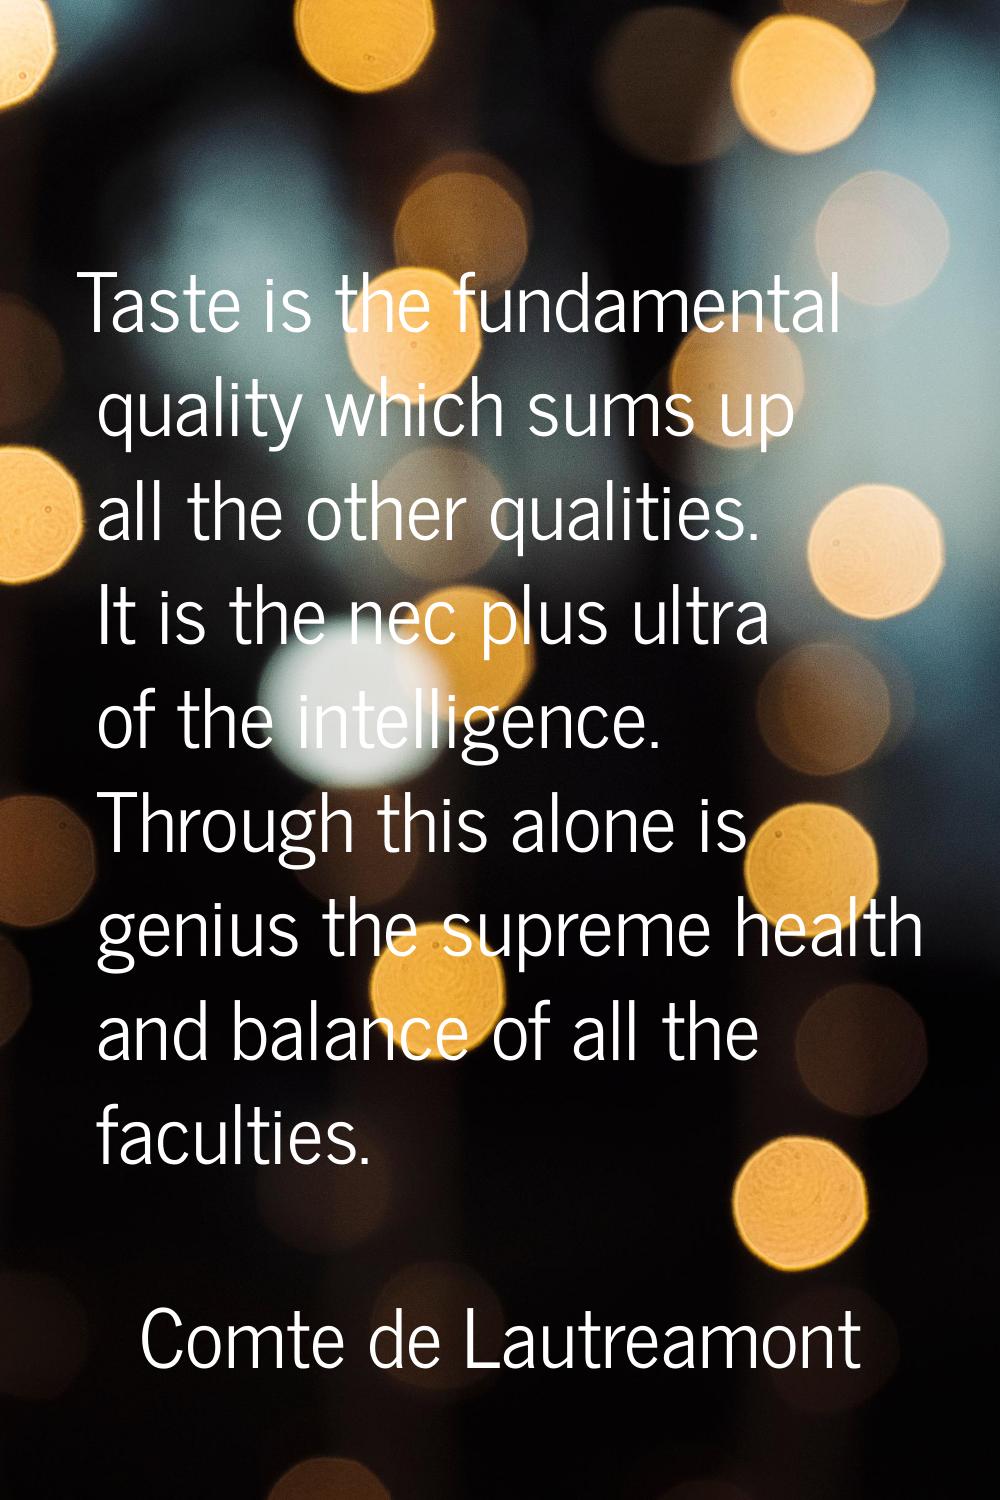 Taste is the fundamental quality which sums up all the other qualities. It is the nec plus ultra of